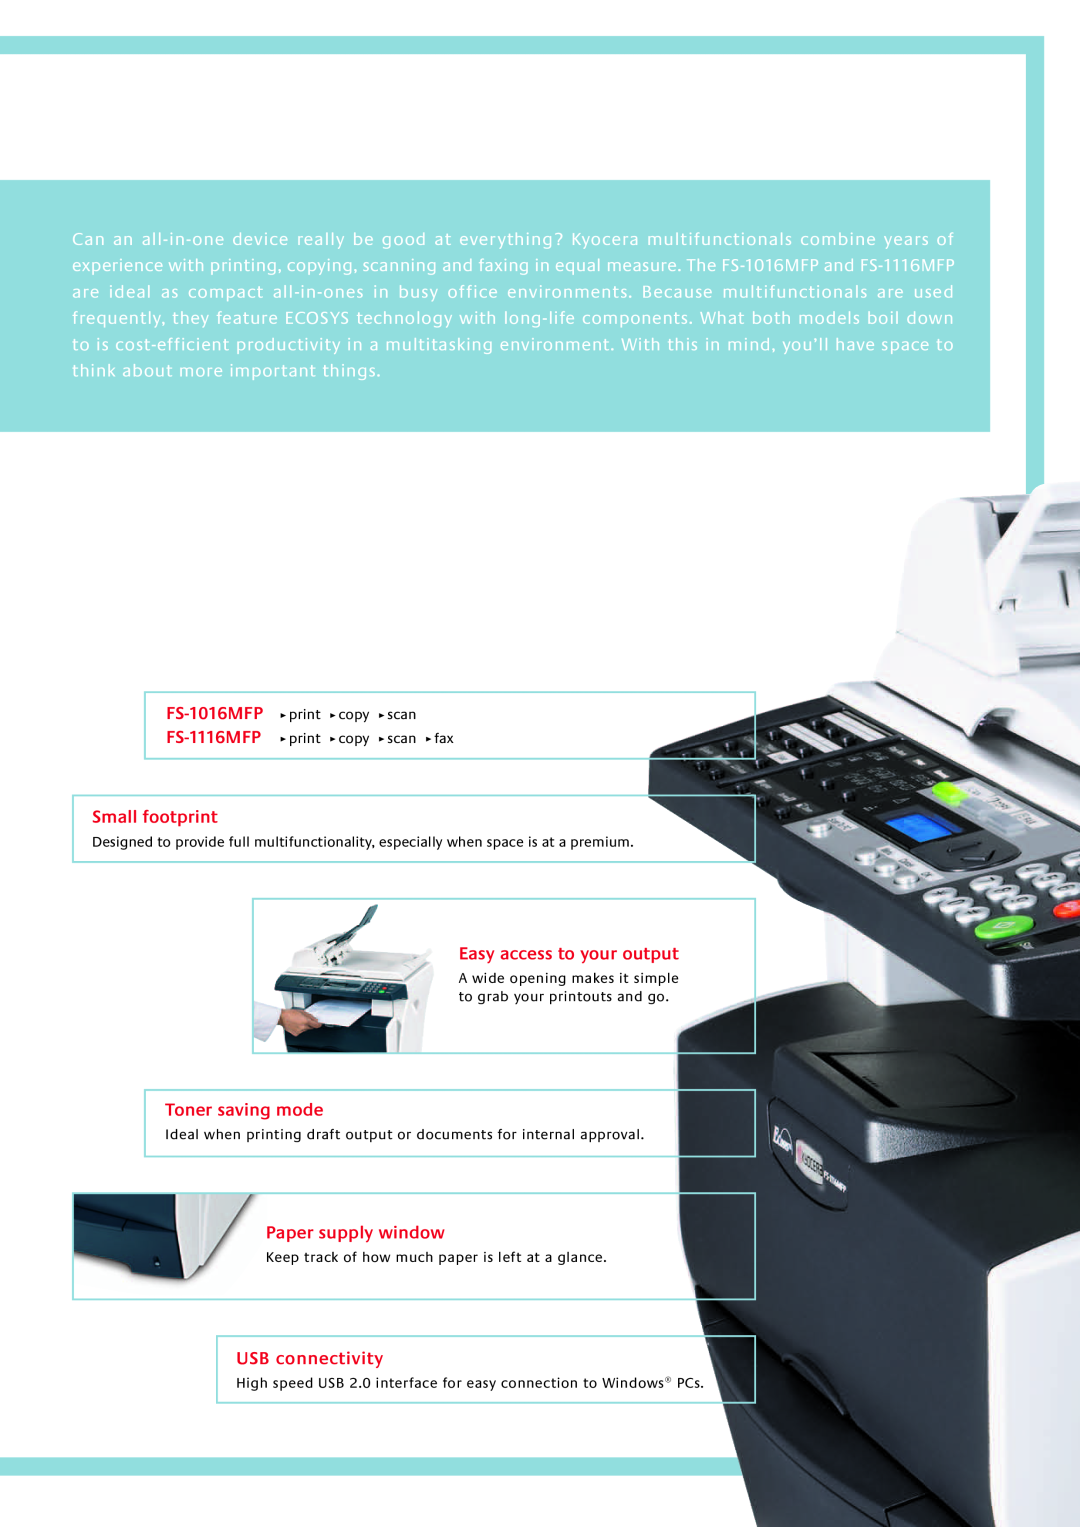 Kyocera FS-1116MFP Small footprint, Easy access to your output, Toner saving mode, Paper supply window, USB connectivity 